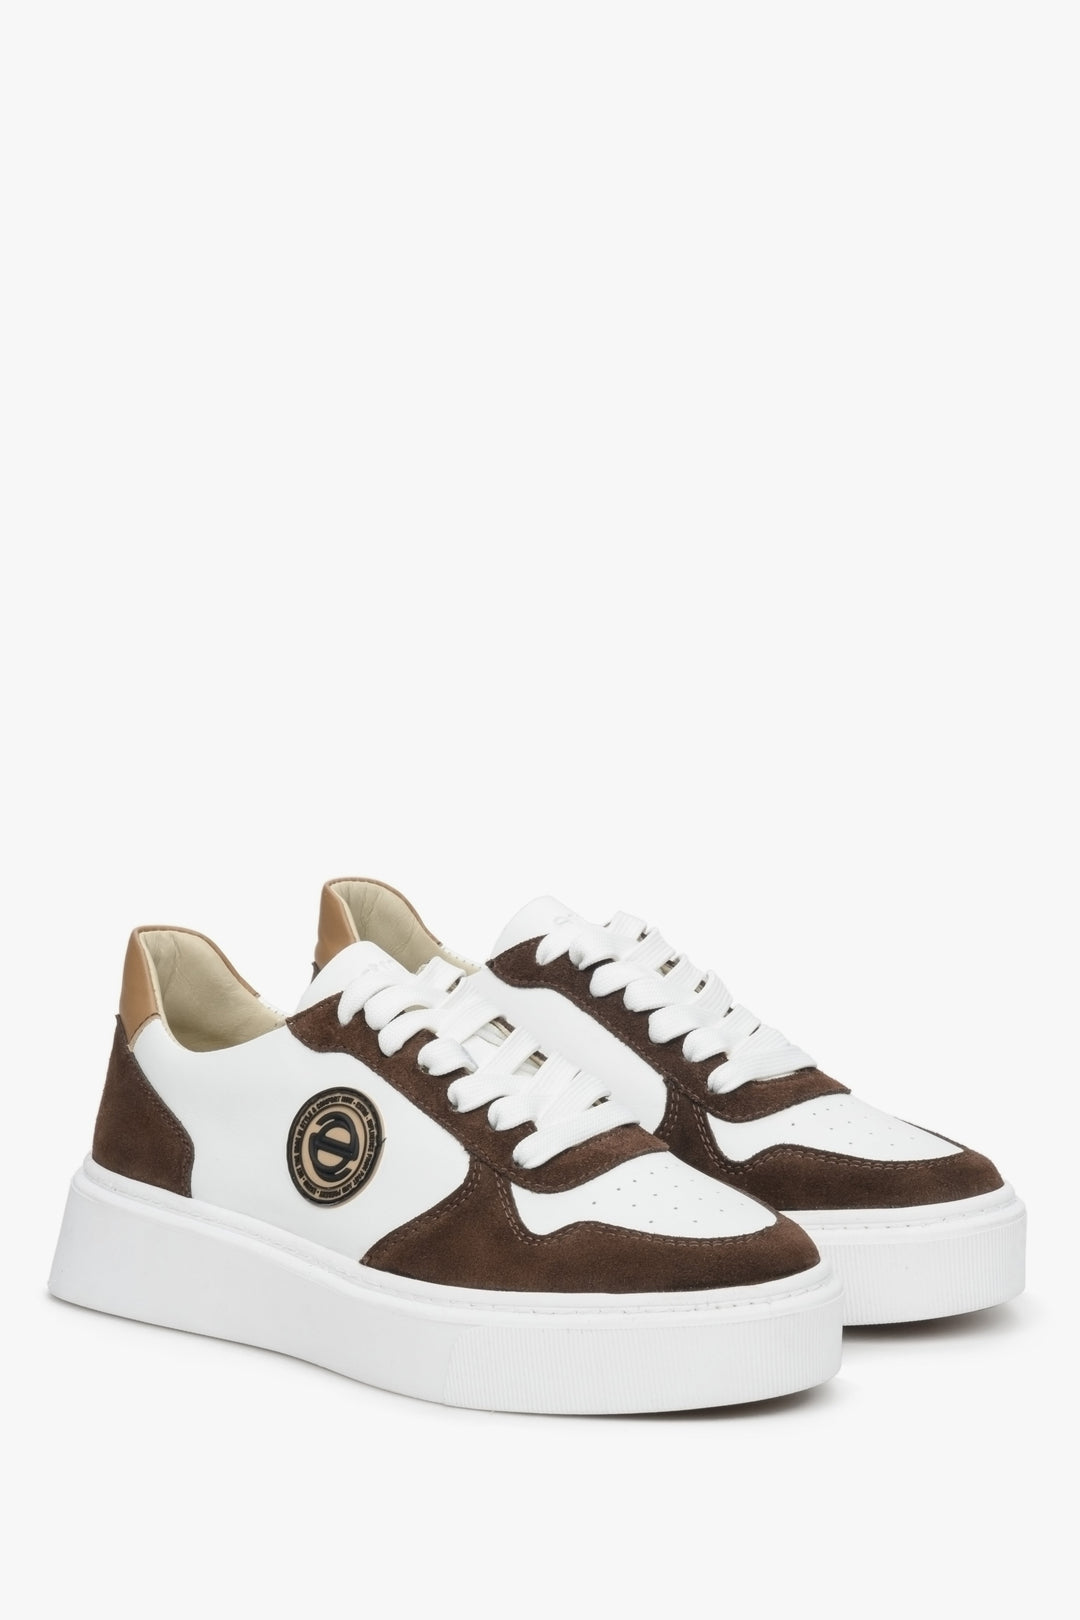 Women's velour and natural leather Estro sneakers with lacing in white and brown.